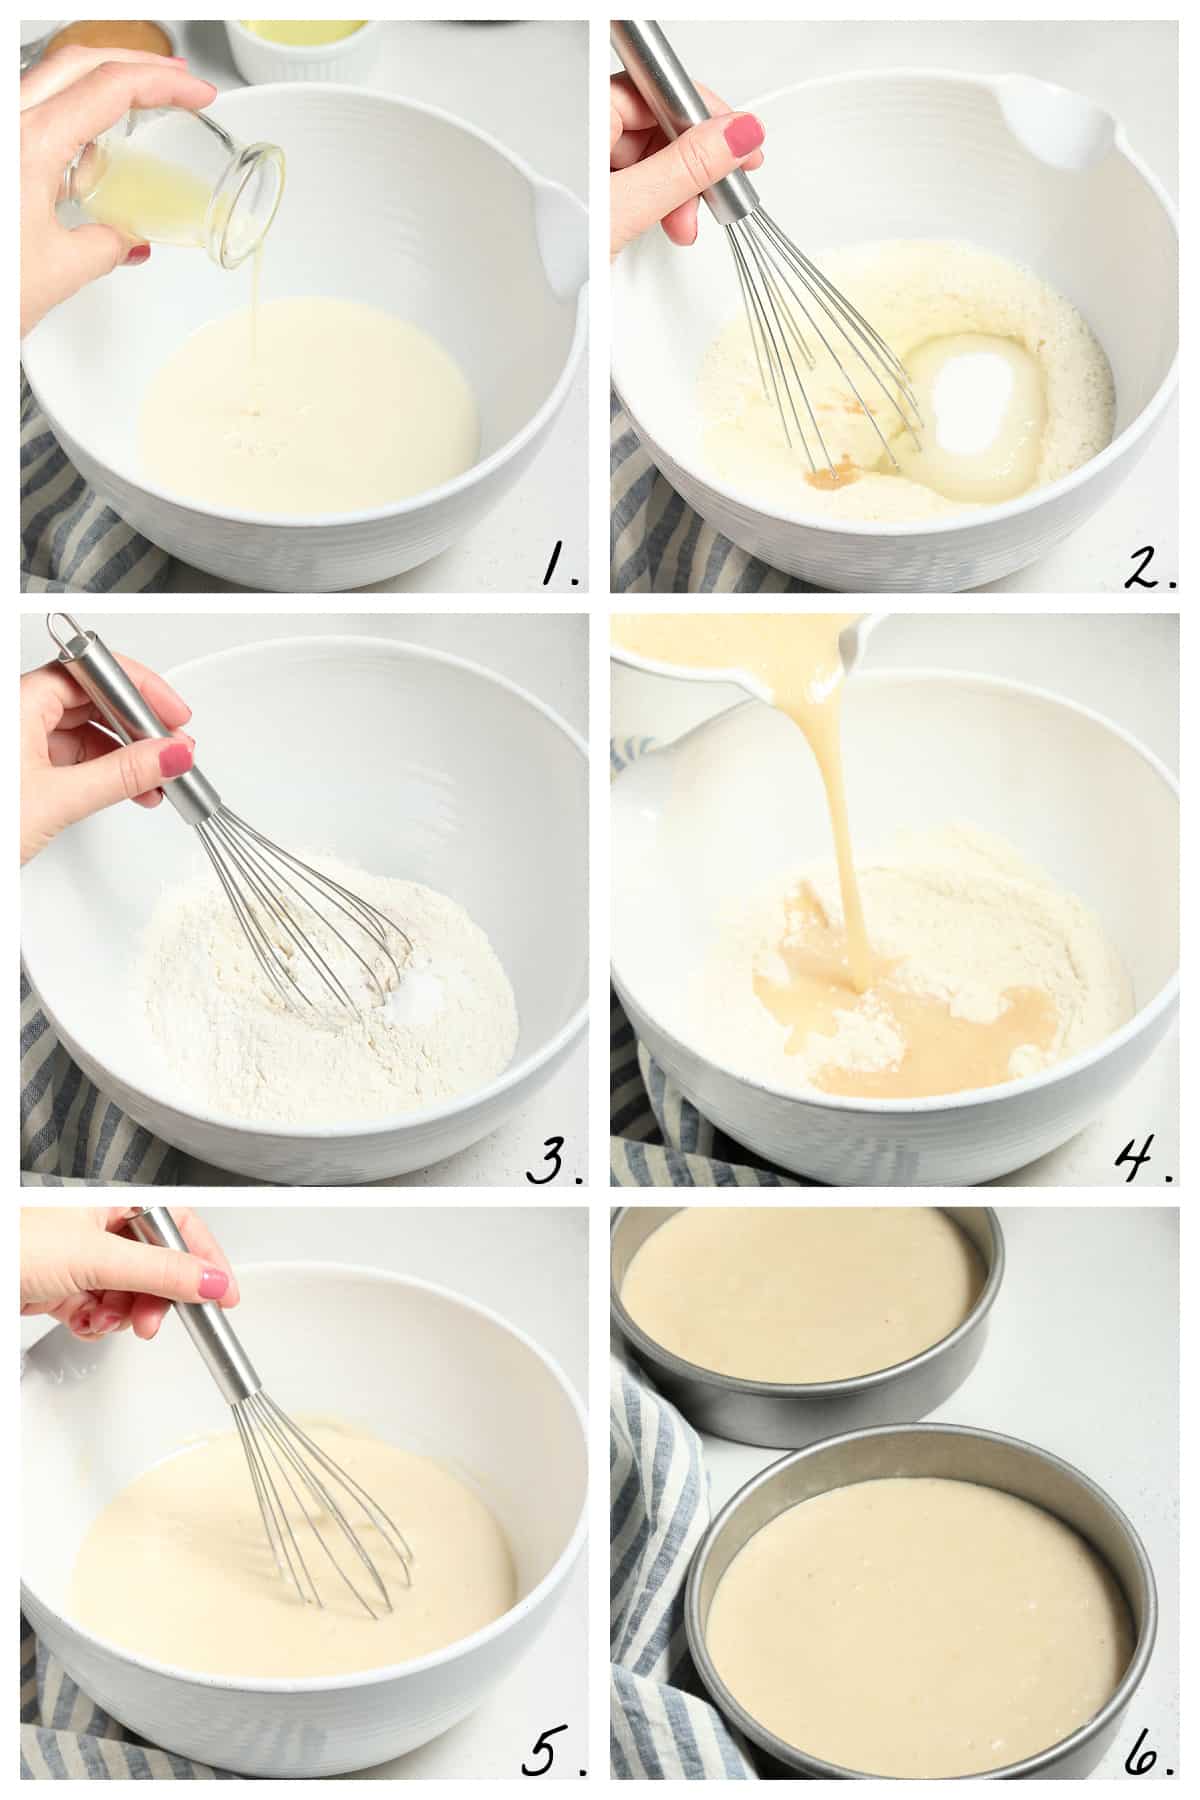 6 process photos showing how to make cake batter and them pouring into cake pan.